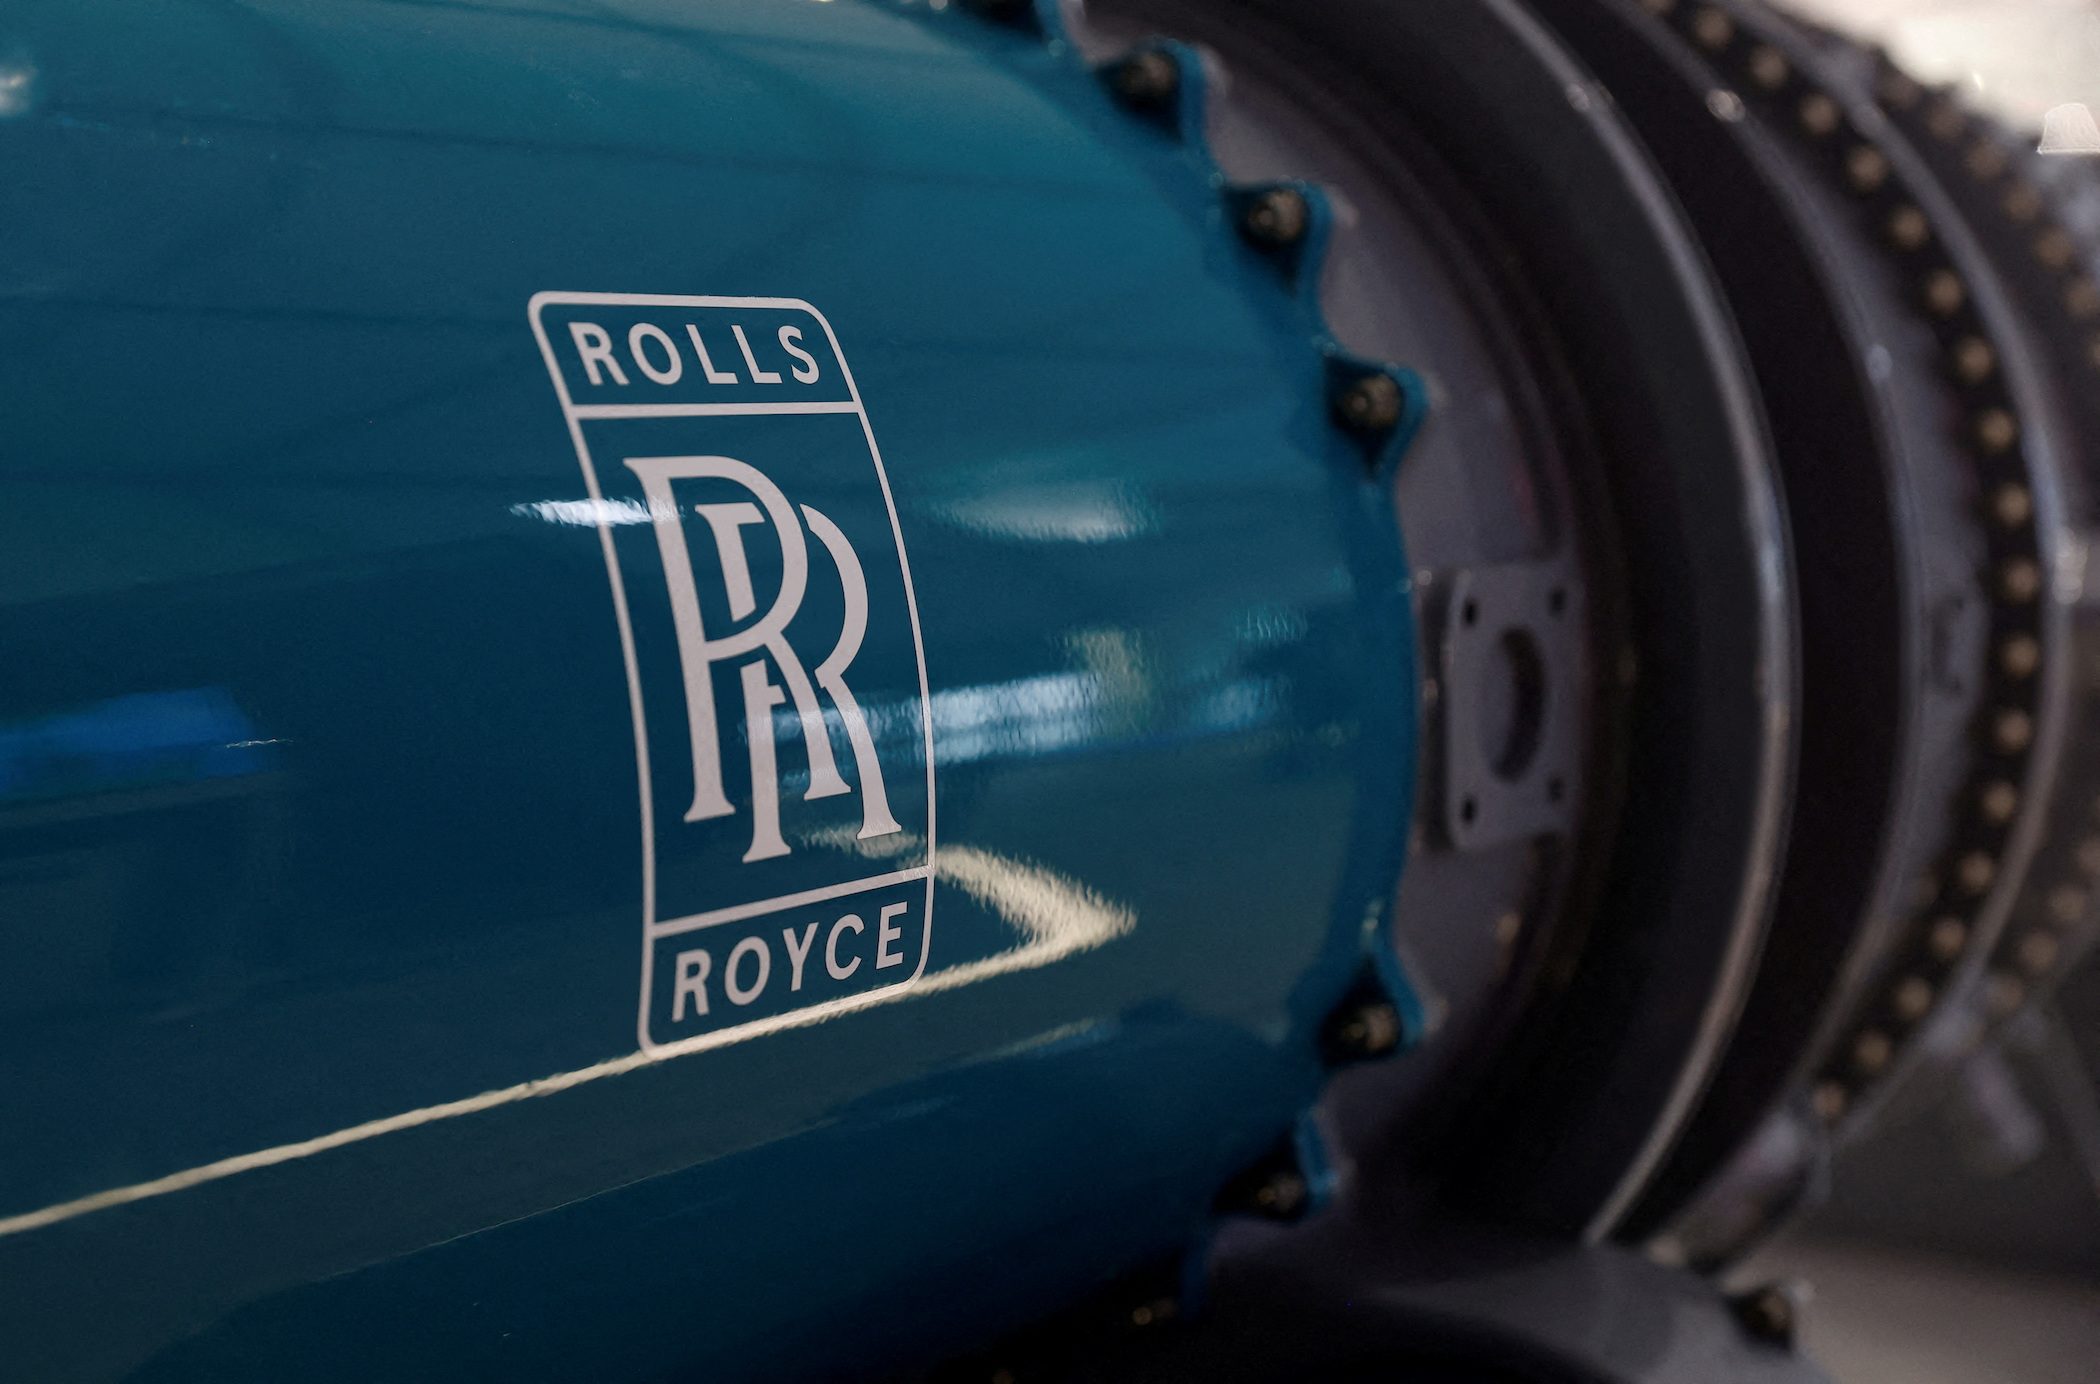 Flying recovery proves a tailwind for new Rolls-Royce boss’ turnaround